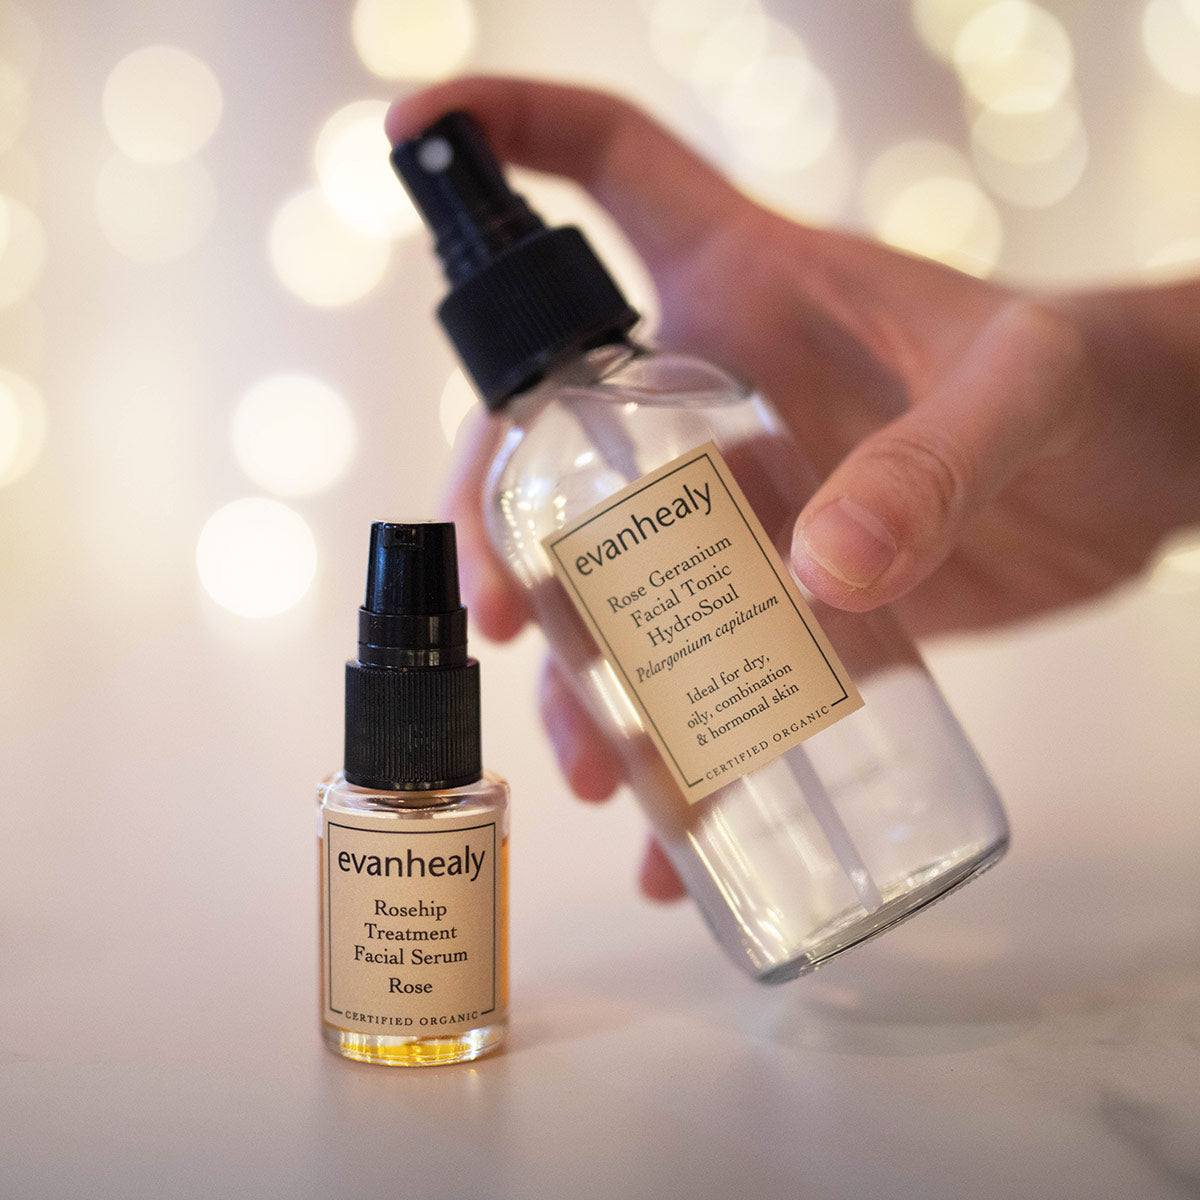 evanhealy skincare ritual for imbalanced skin with rose geranium hydrosol in hand